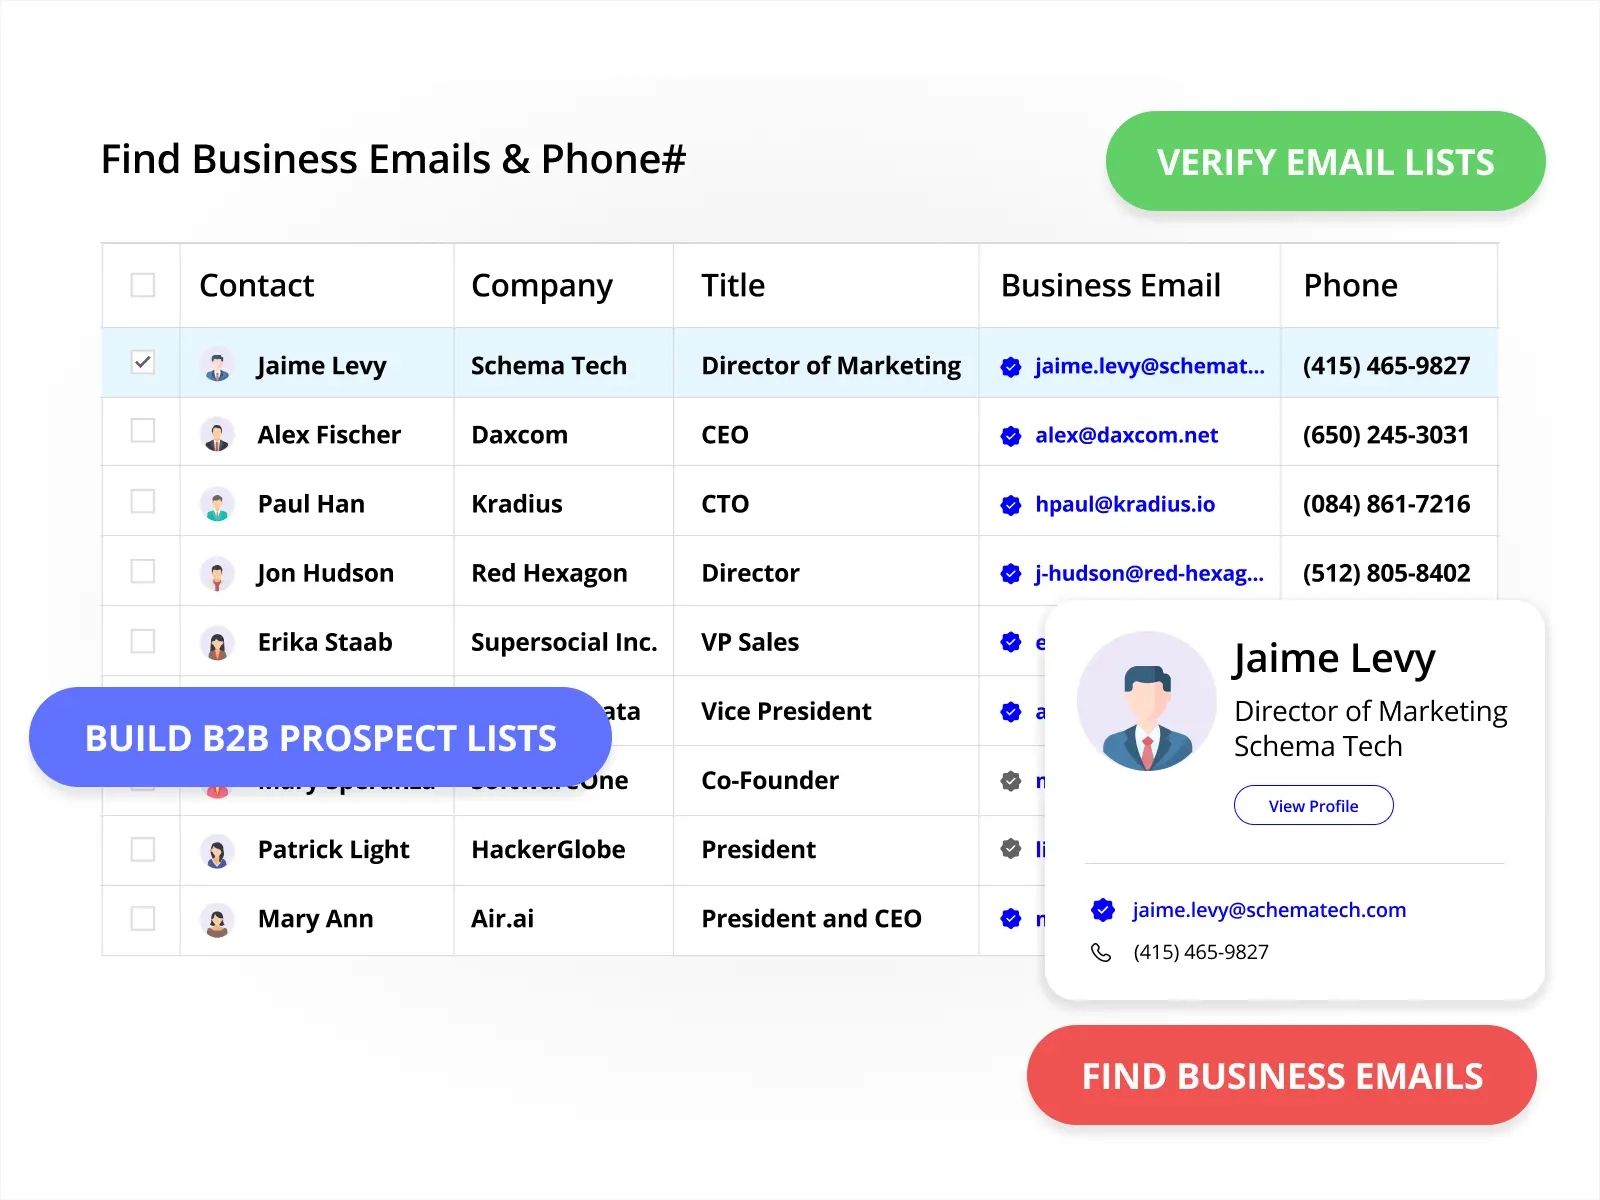 B2B Prospecting tool to find business emails